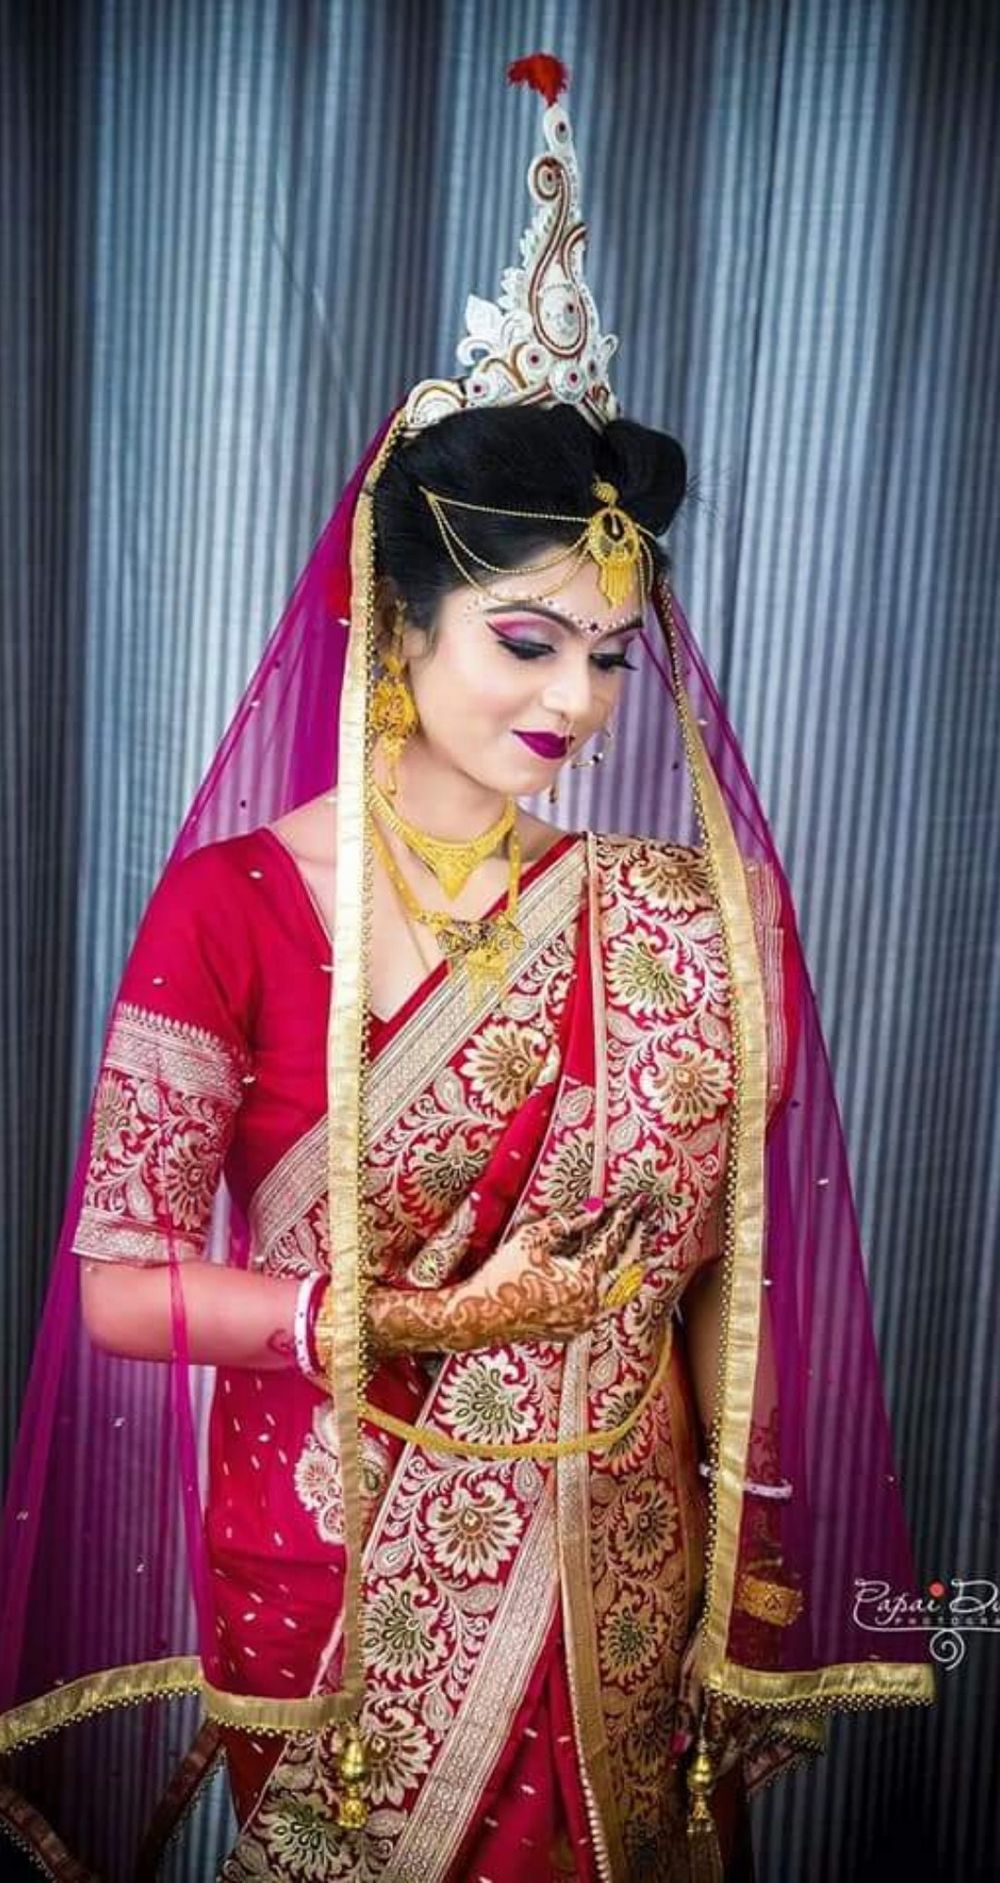 Photo From Oendrila Bhowmick Bridal Makeup - By Parul Khattar Makeup Artist